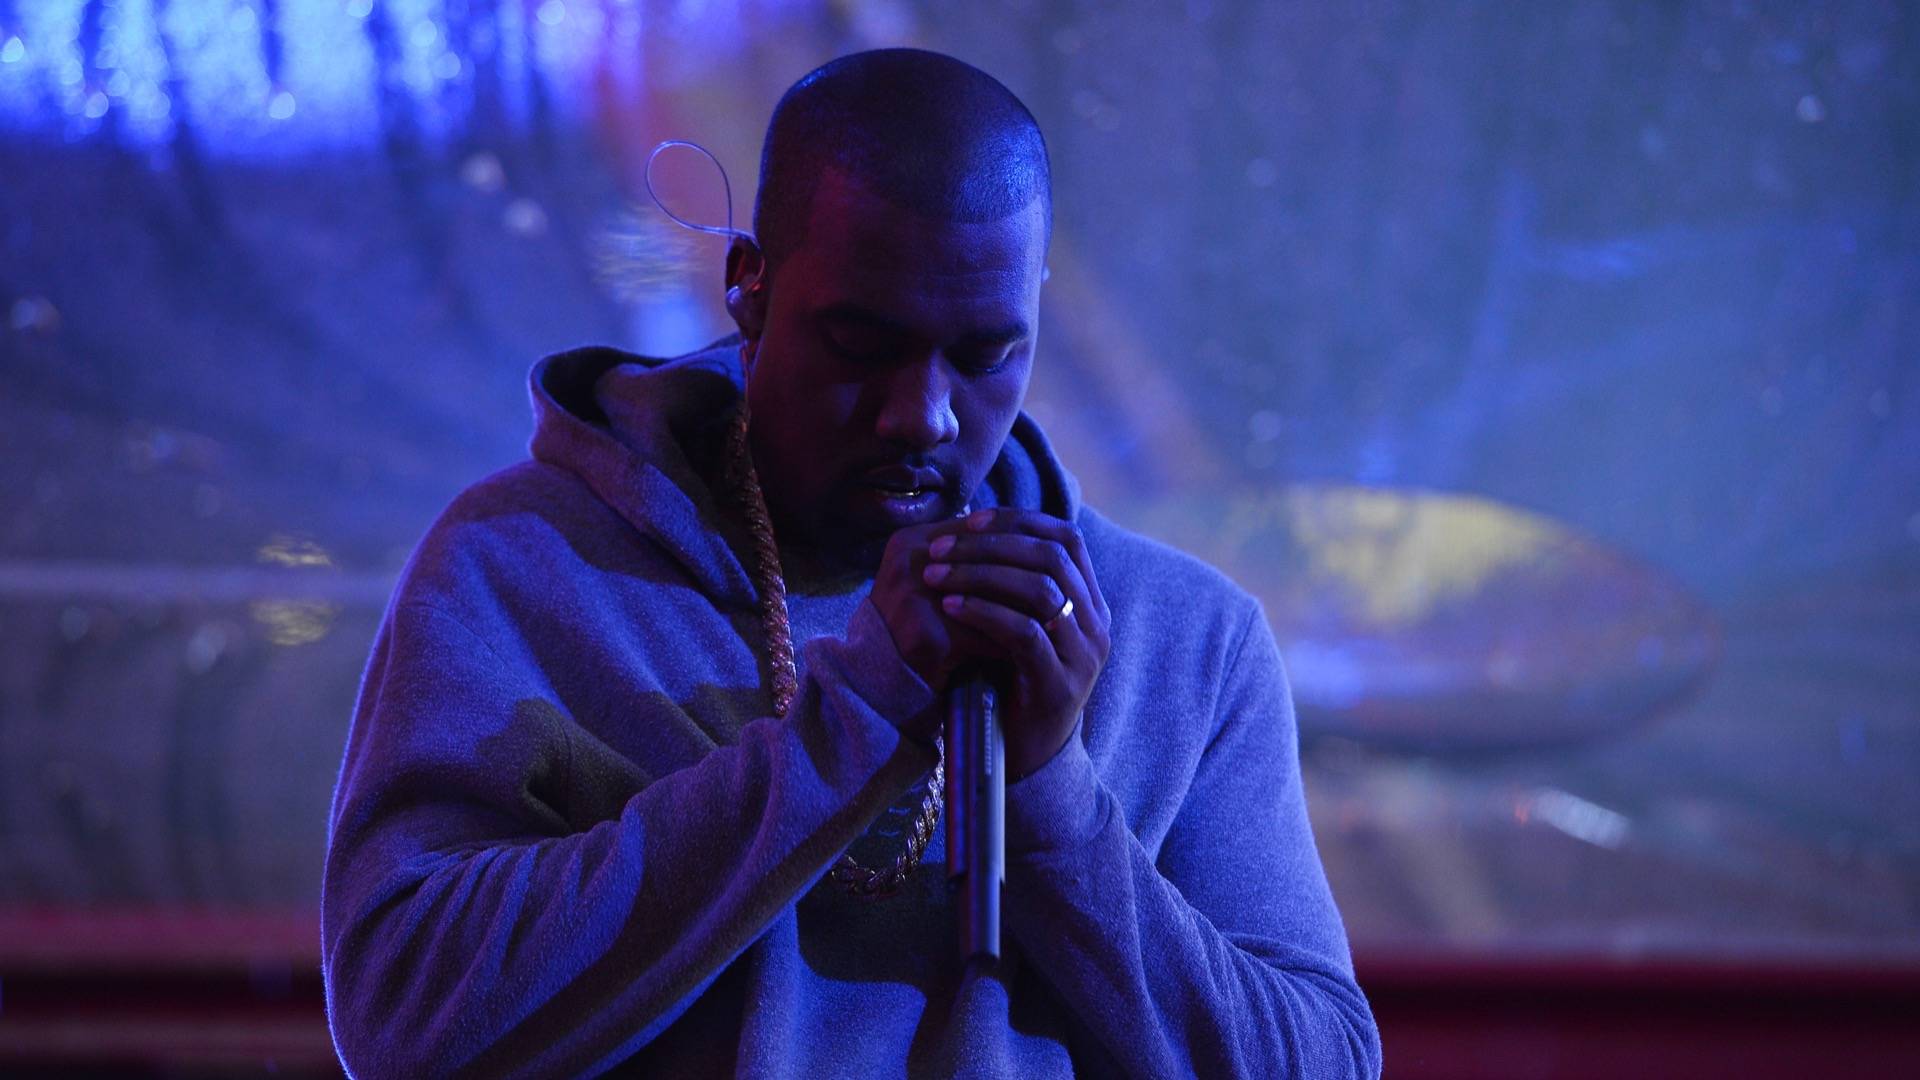 Kanye West holding microphone in grey hoodie and chain necklace, with dim lighting and multicoloured background 